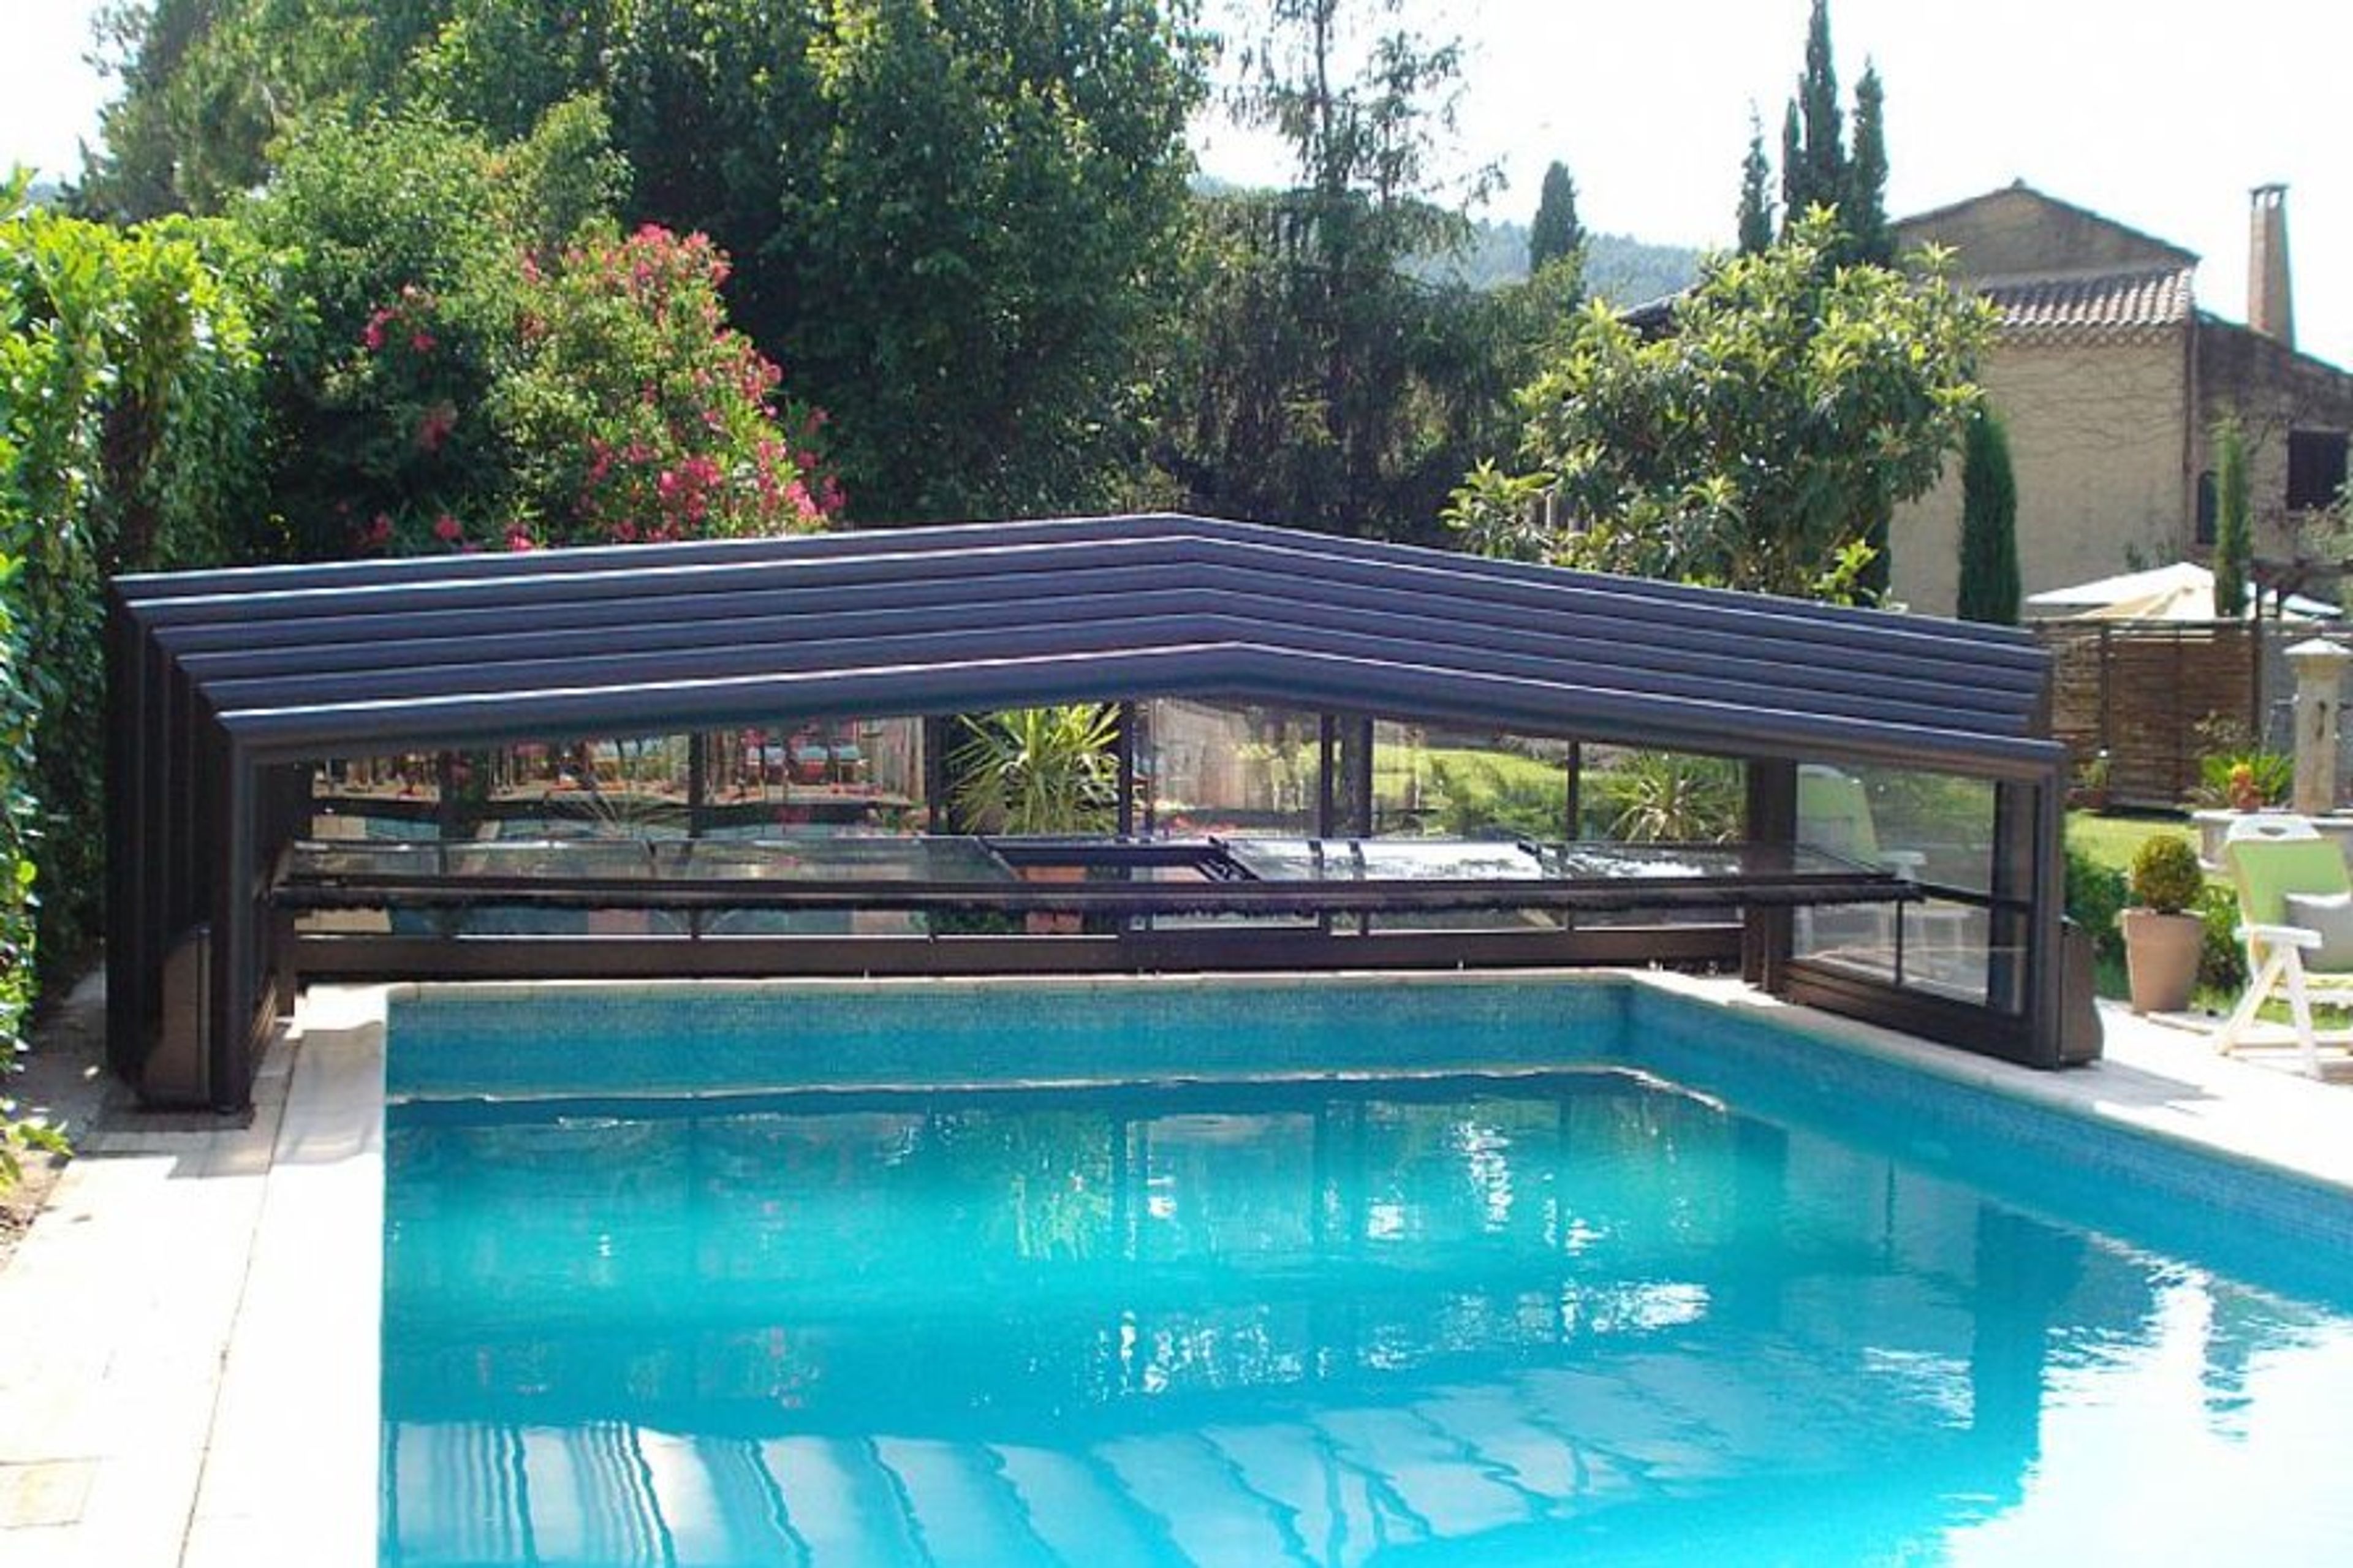 the roof open  on the pool